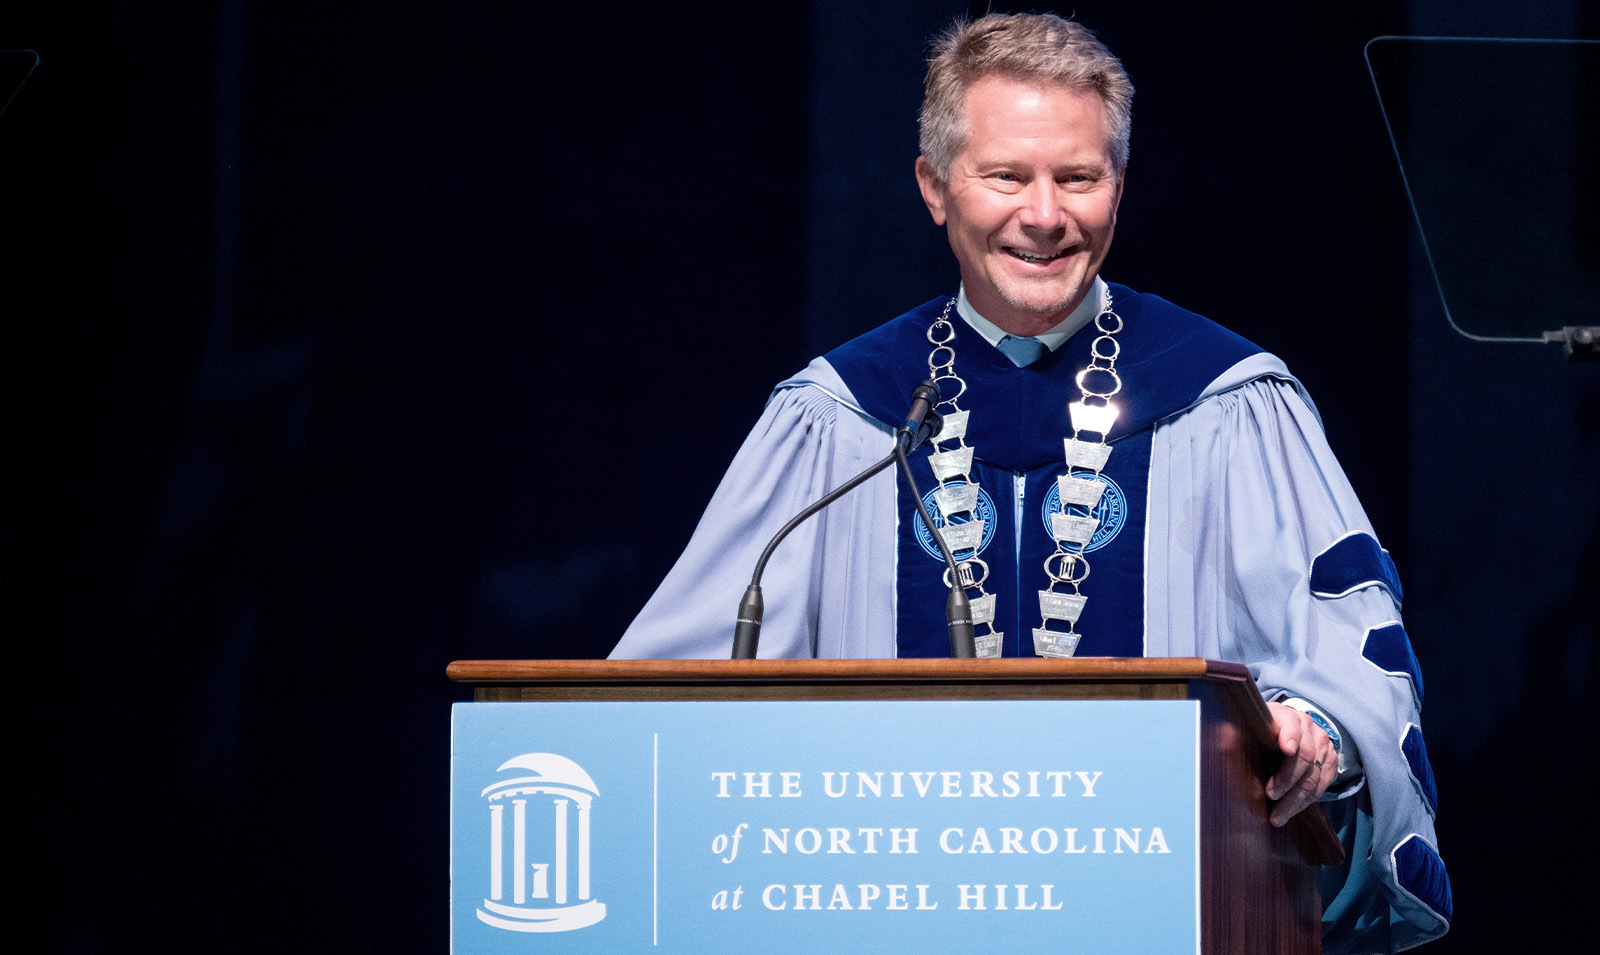 Chancellor Kevin M. Guskiewicz smiling while wearing regalia and speaking at a podium at UNC-Chapel Hill's University Day.